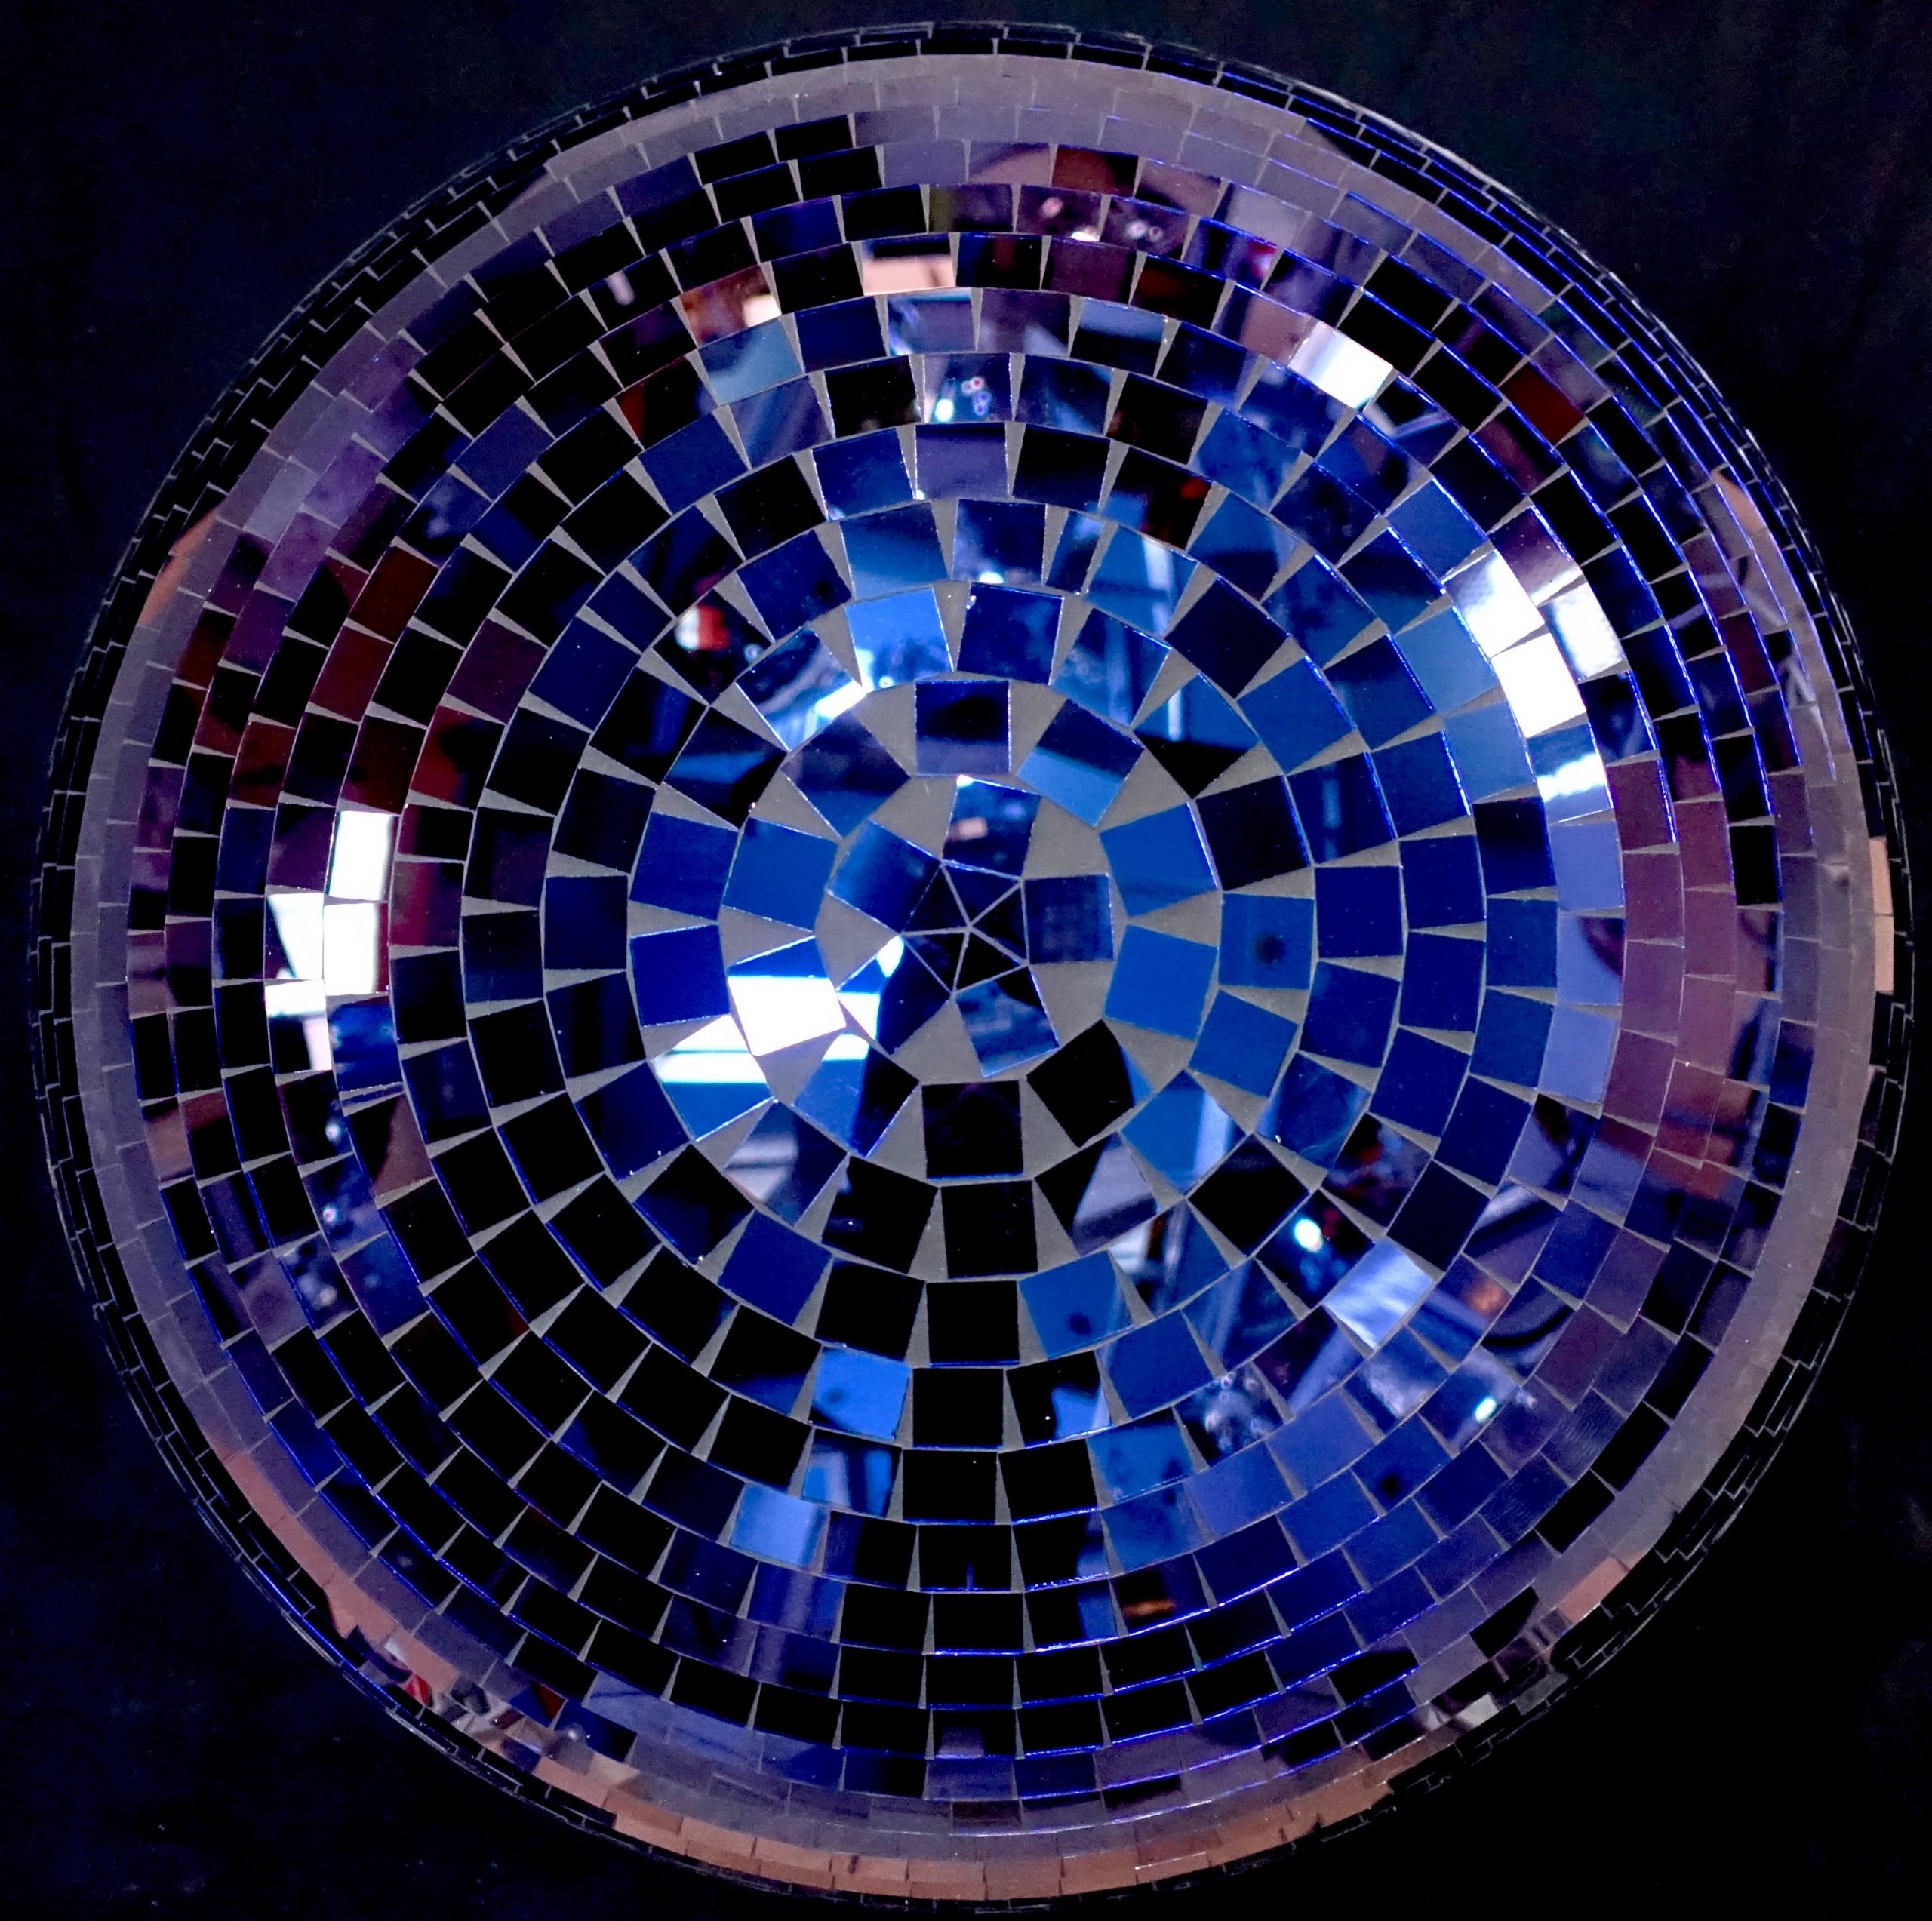 750mm blue mirror ball approx weight - 25kg dry hire fee - £130 purchase price - POA